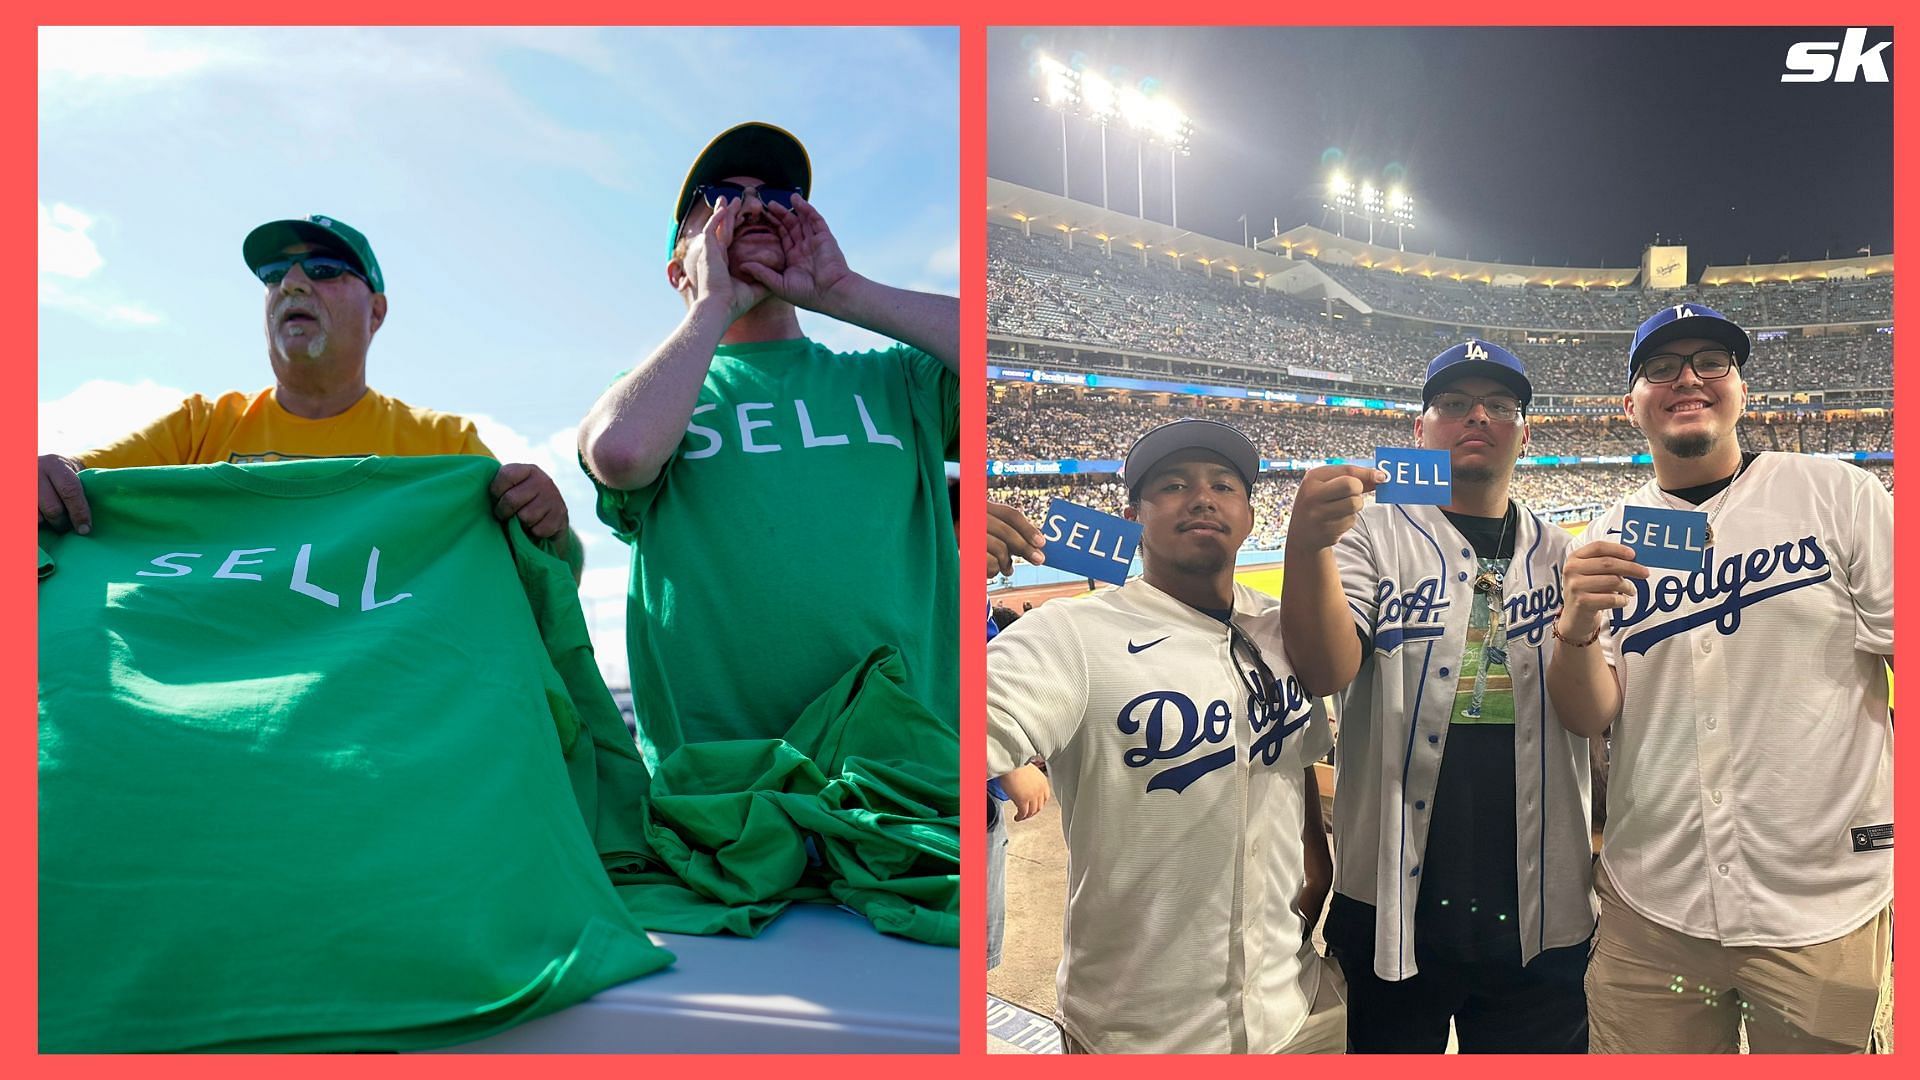 A's and Dodgers fans unite in “Sell the Team” chants at Dodgers